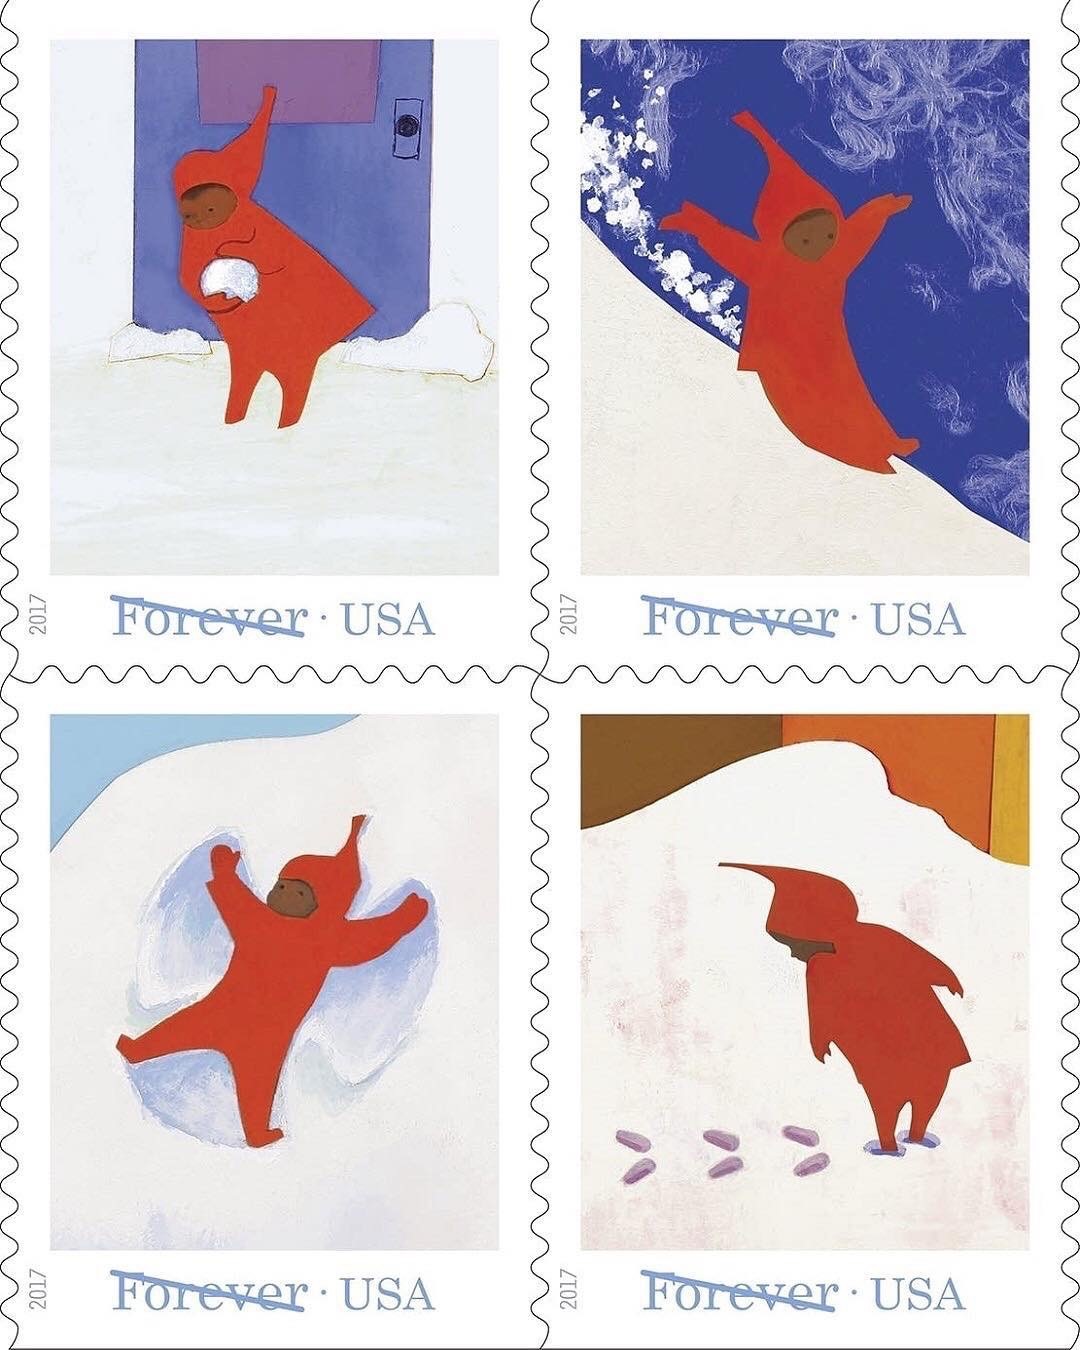 Four stamps showing scenes of a little boy in a red snow suit playing from "The Snowy Day"